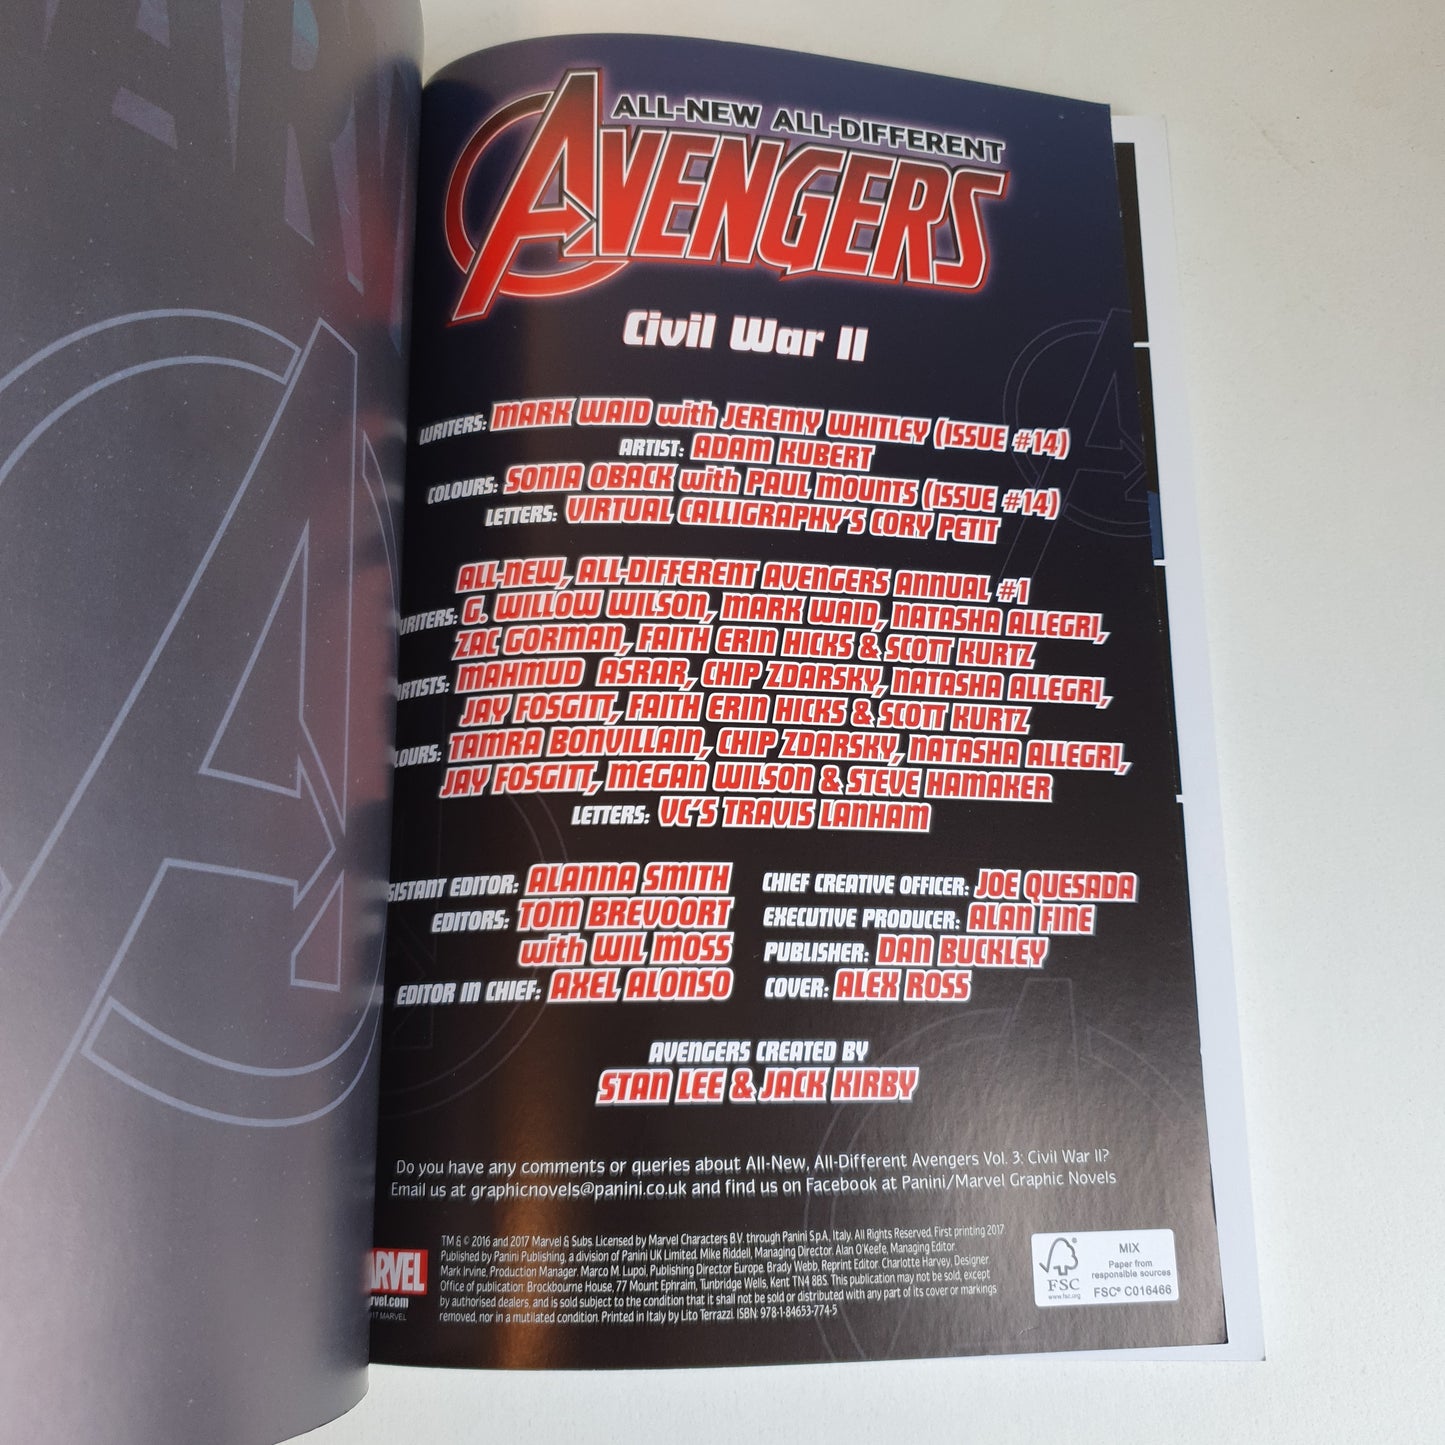 All-New All-Different Avengers Civil War II by Waid, Whitley & Kubert (2017)